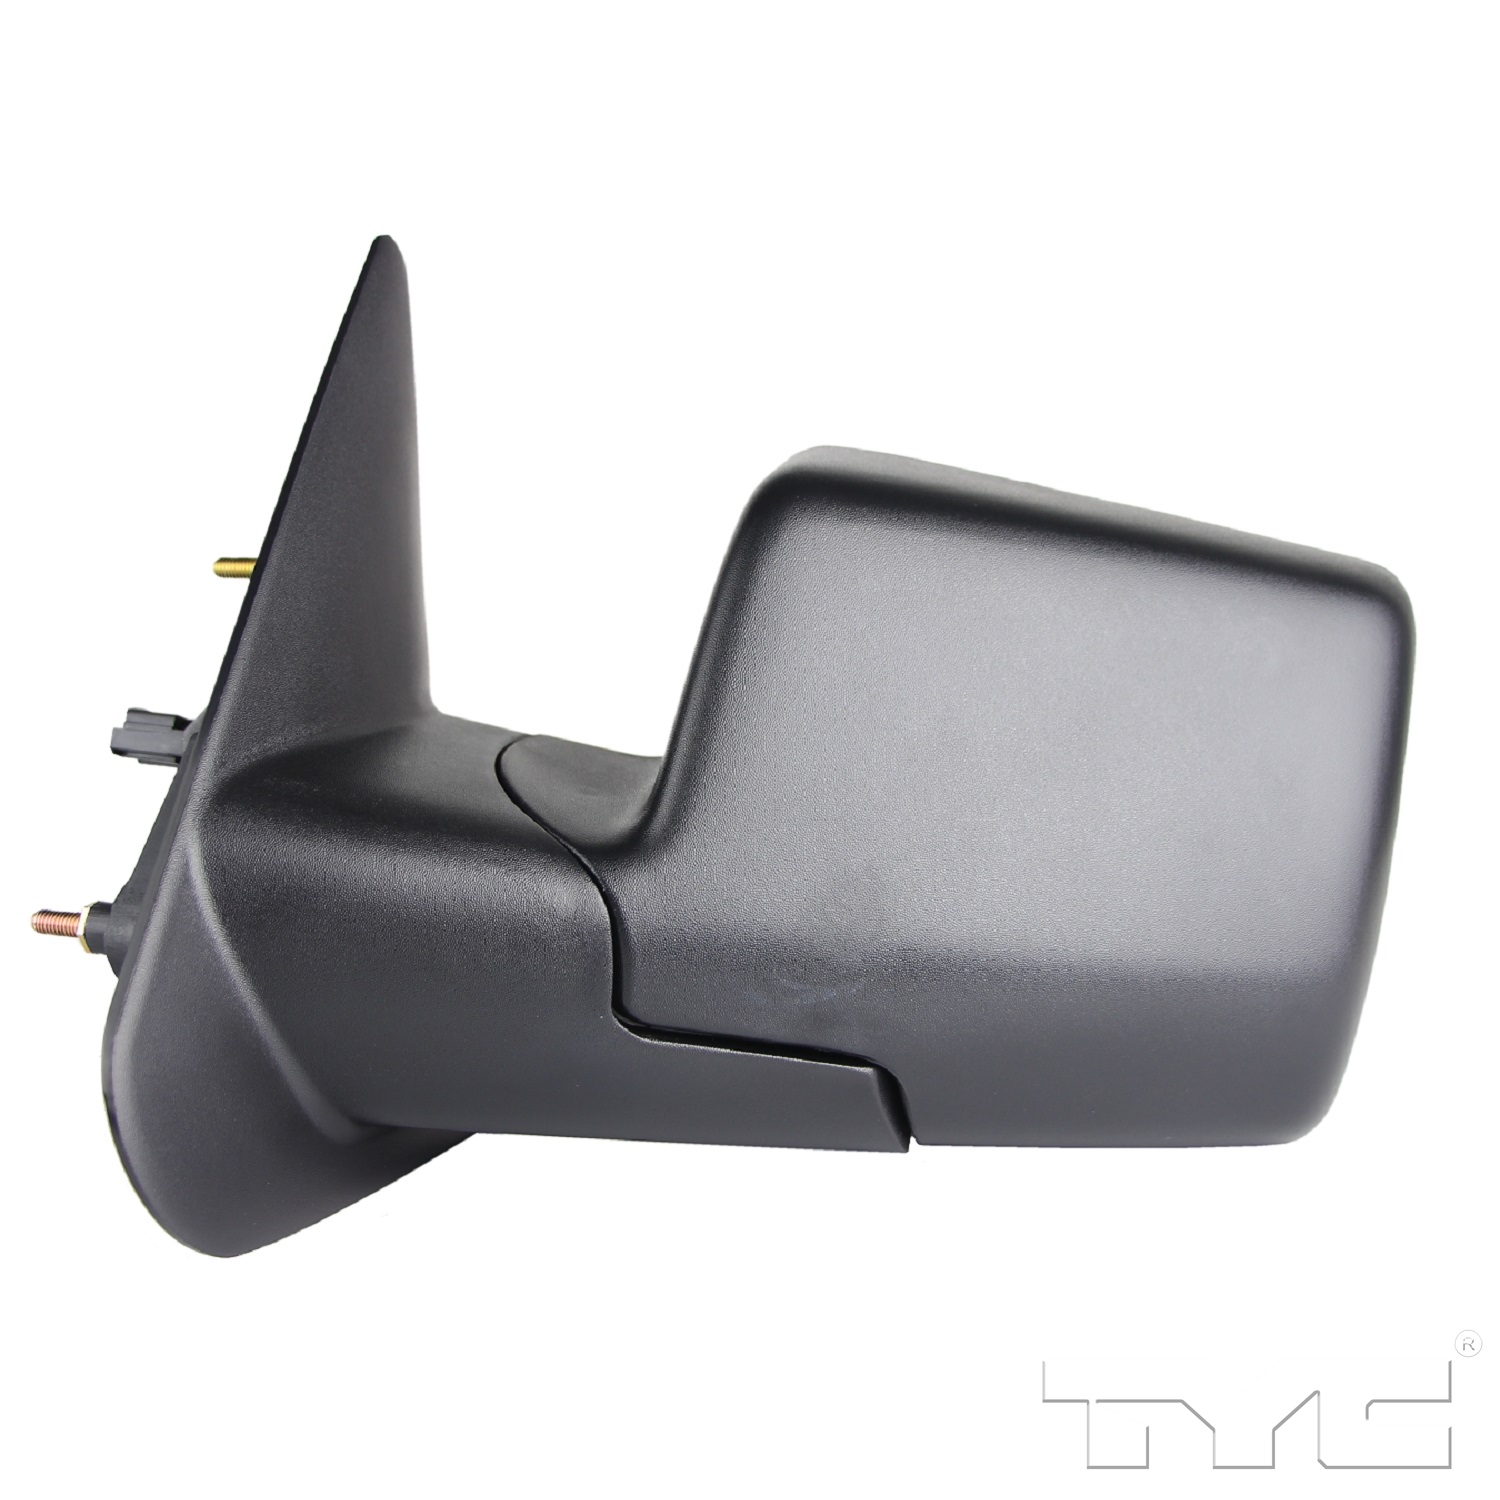 Aftermarket MIRRORS for MAZDA - B2300, B2300,06-07,LT Mirror outside rear view